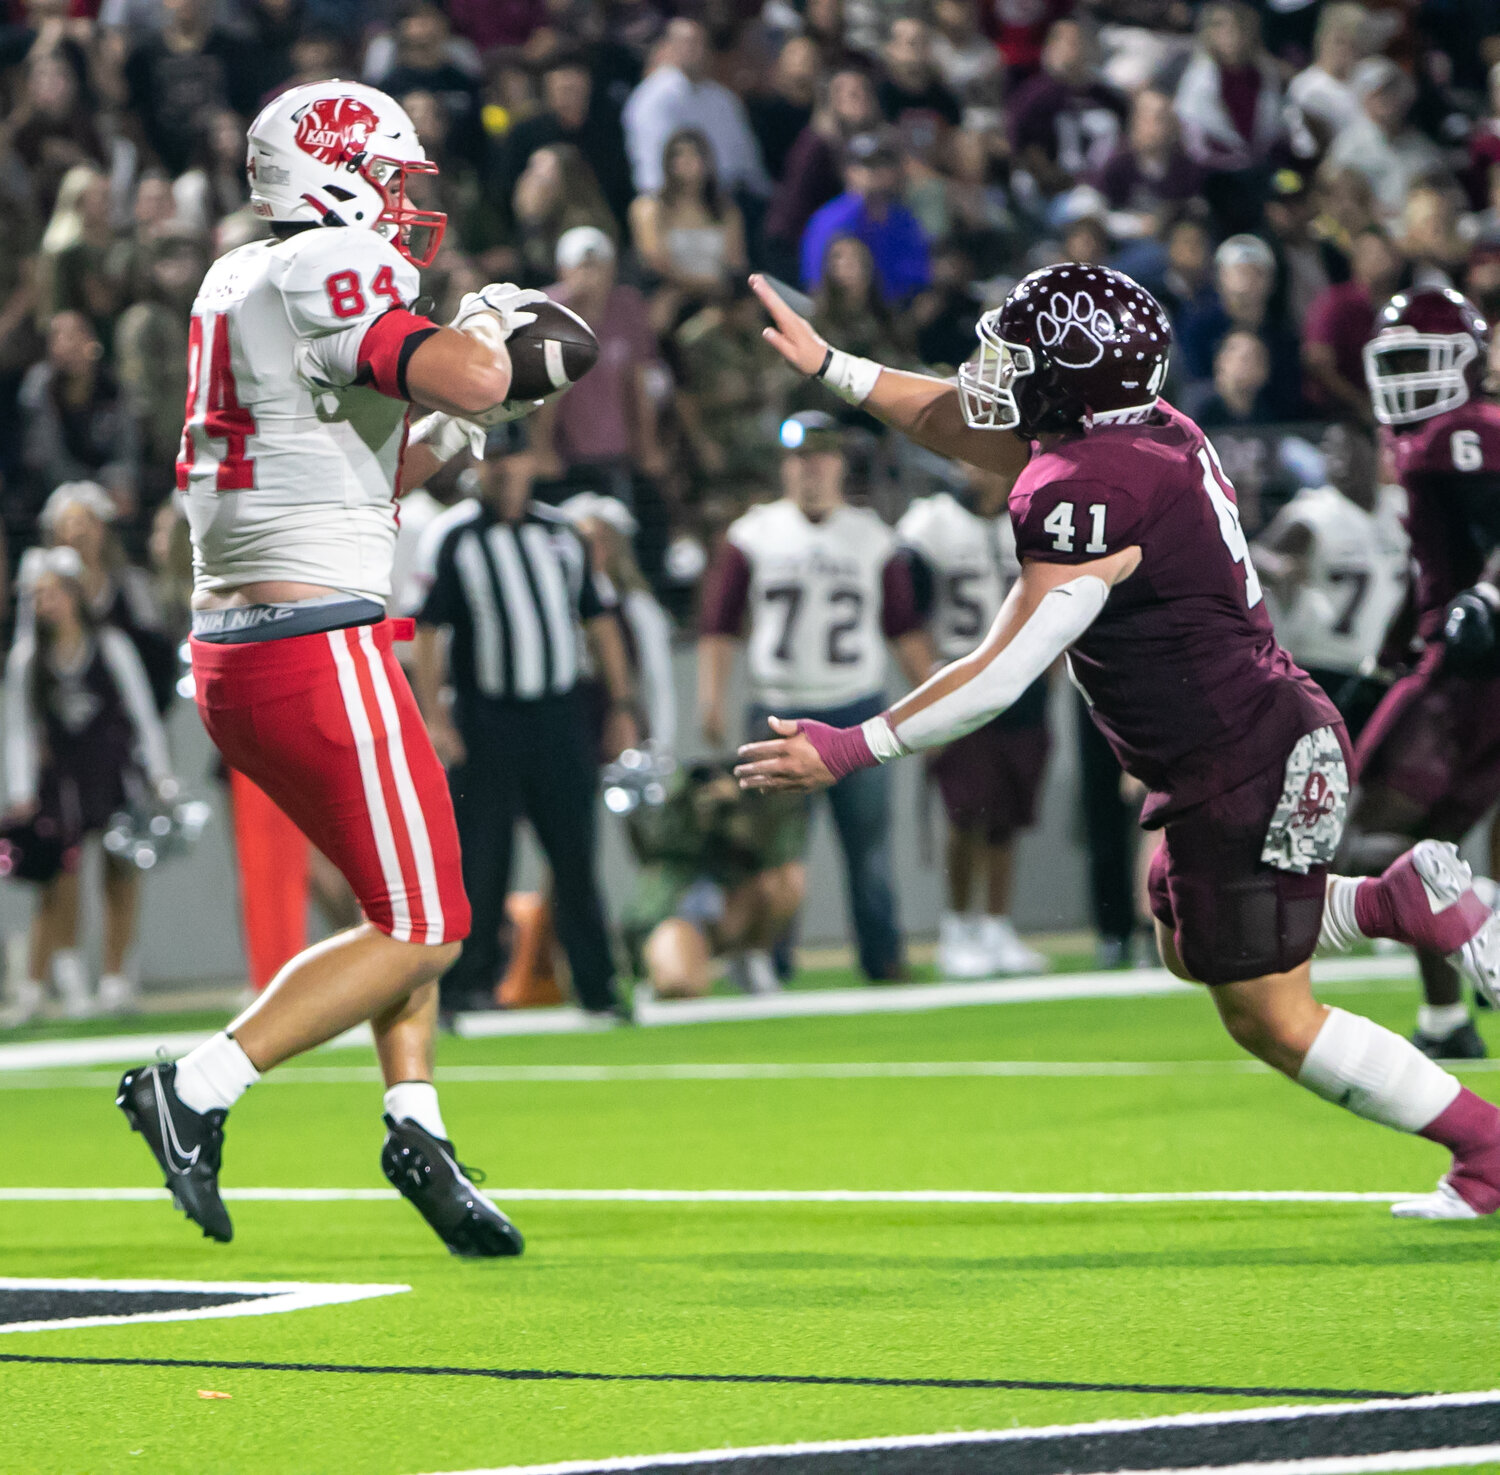 Luke Carter catches a touchdown pass during Friday's area round game between Katy and Cy-Fair at the Berry Center in Cypress.